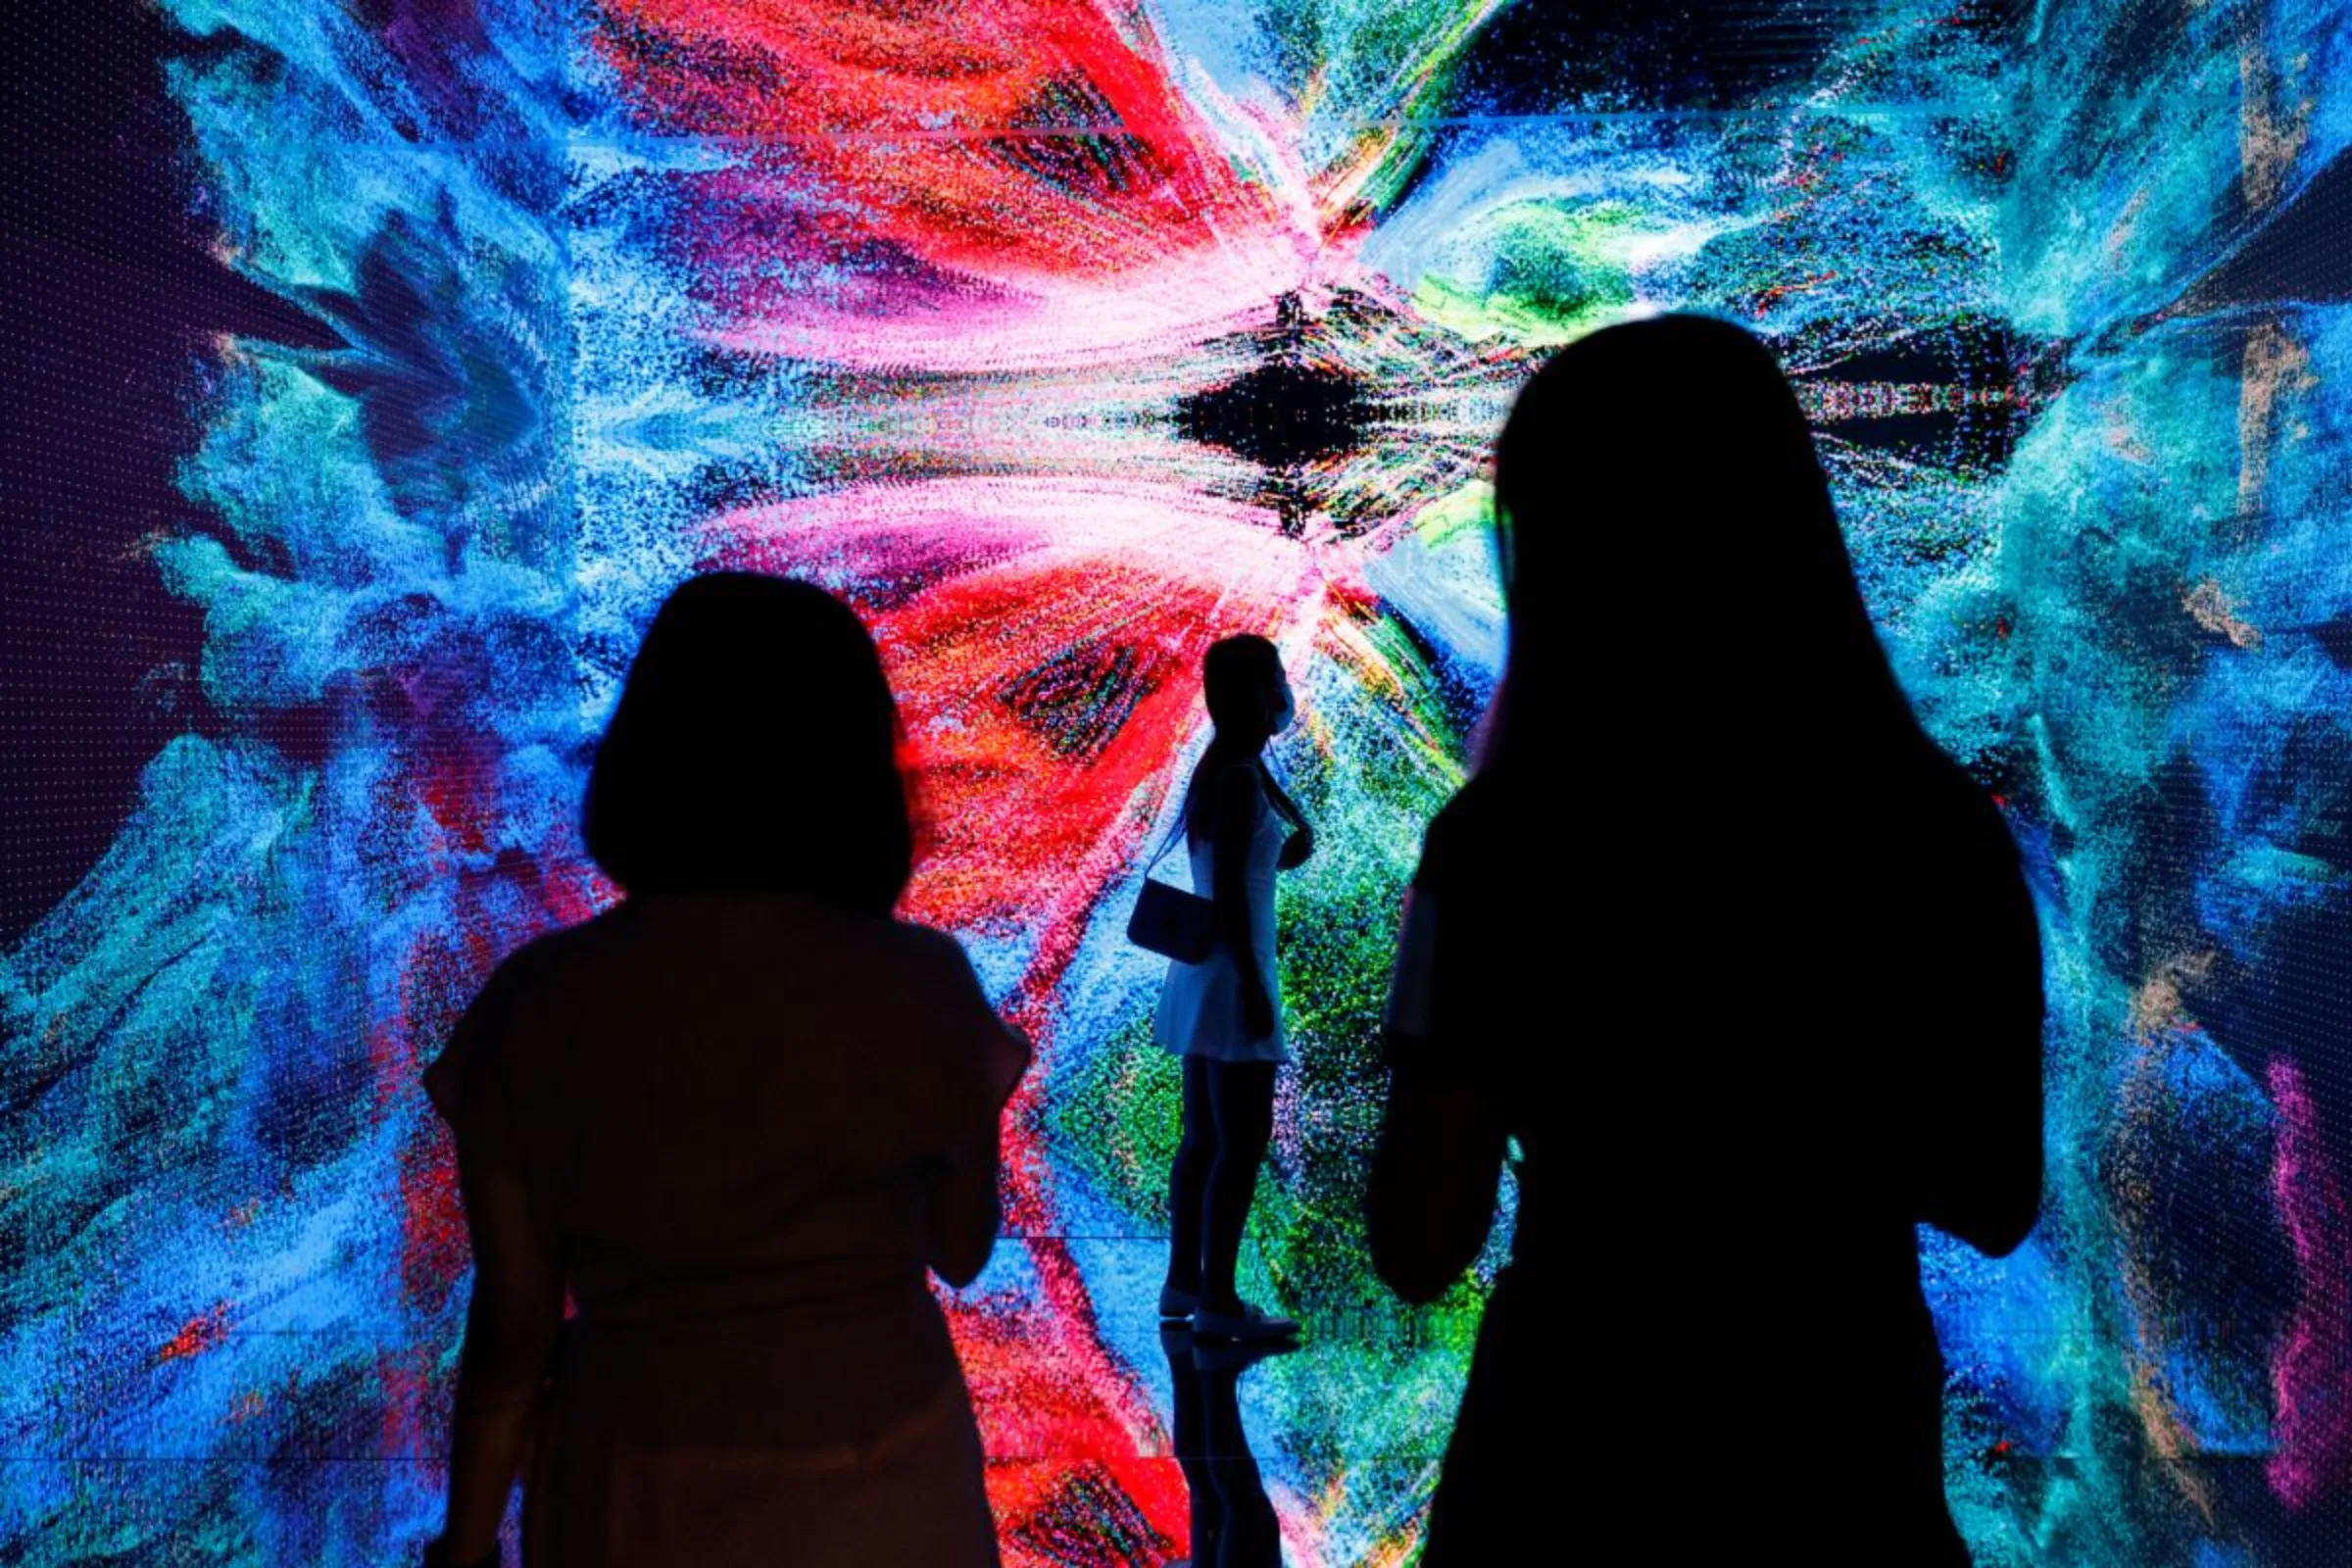 Visitors are pictured in front of an immersive art installation titled 'Machine Hallucinations - Space: Metaverse' by media artist Refik Anadol, in Hong Kong, China